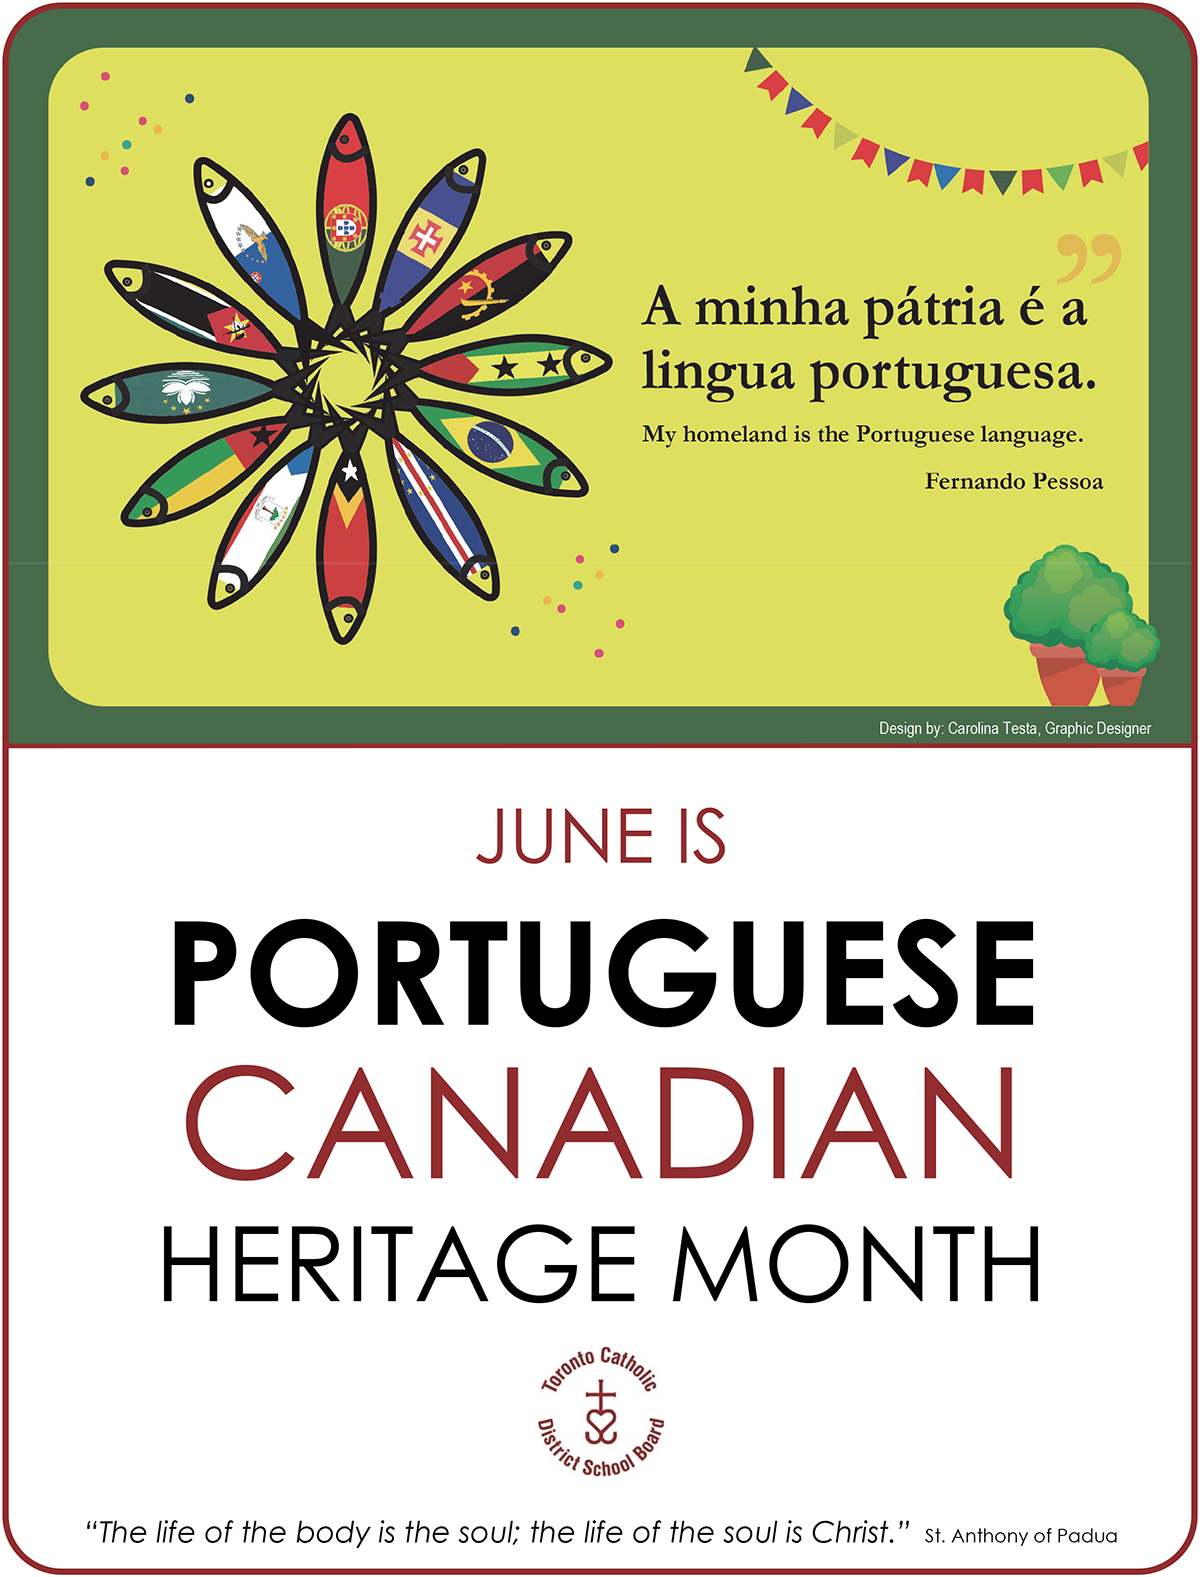 June is Portuguese Canadian Heritage Month